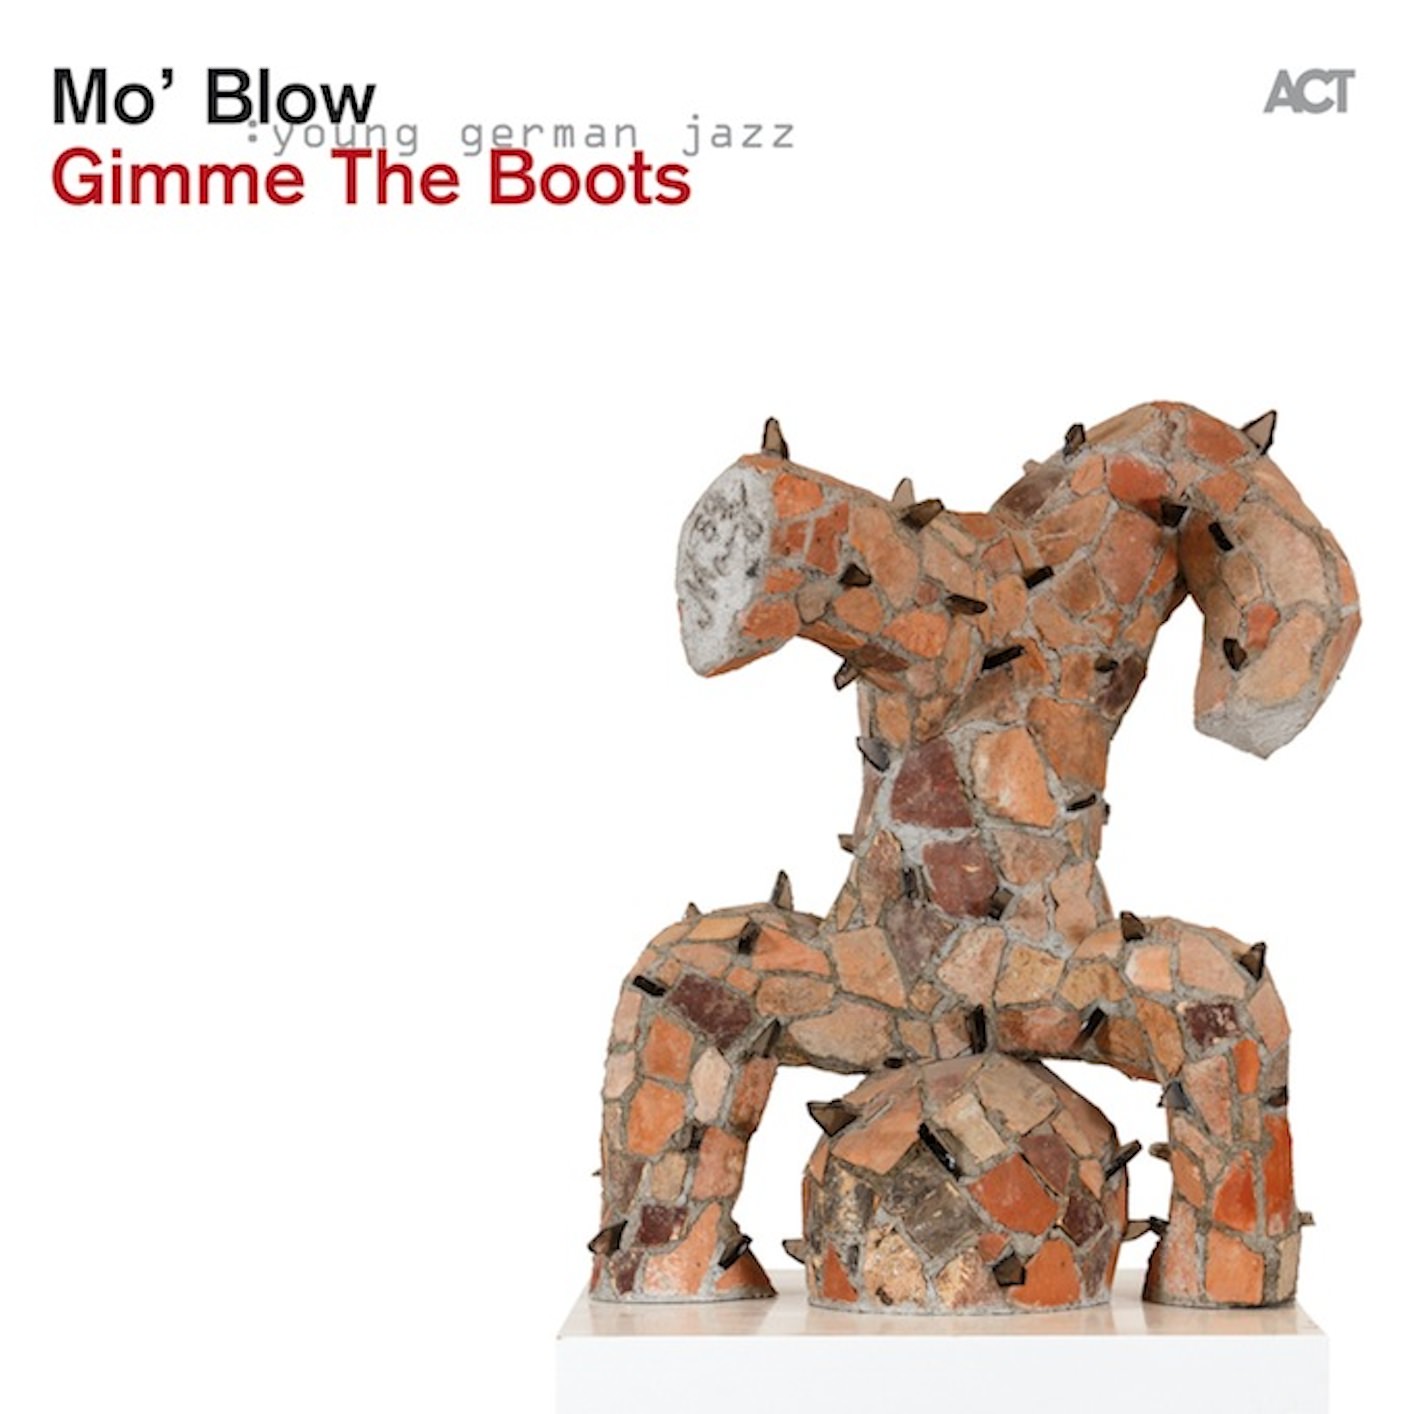 Mo’ Blow – Gimme The Boots (2013/2014) [ProStudioMasters FLAC 24bit/88,2kHz]